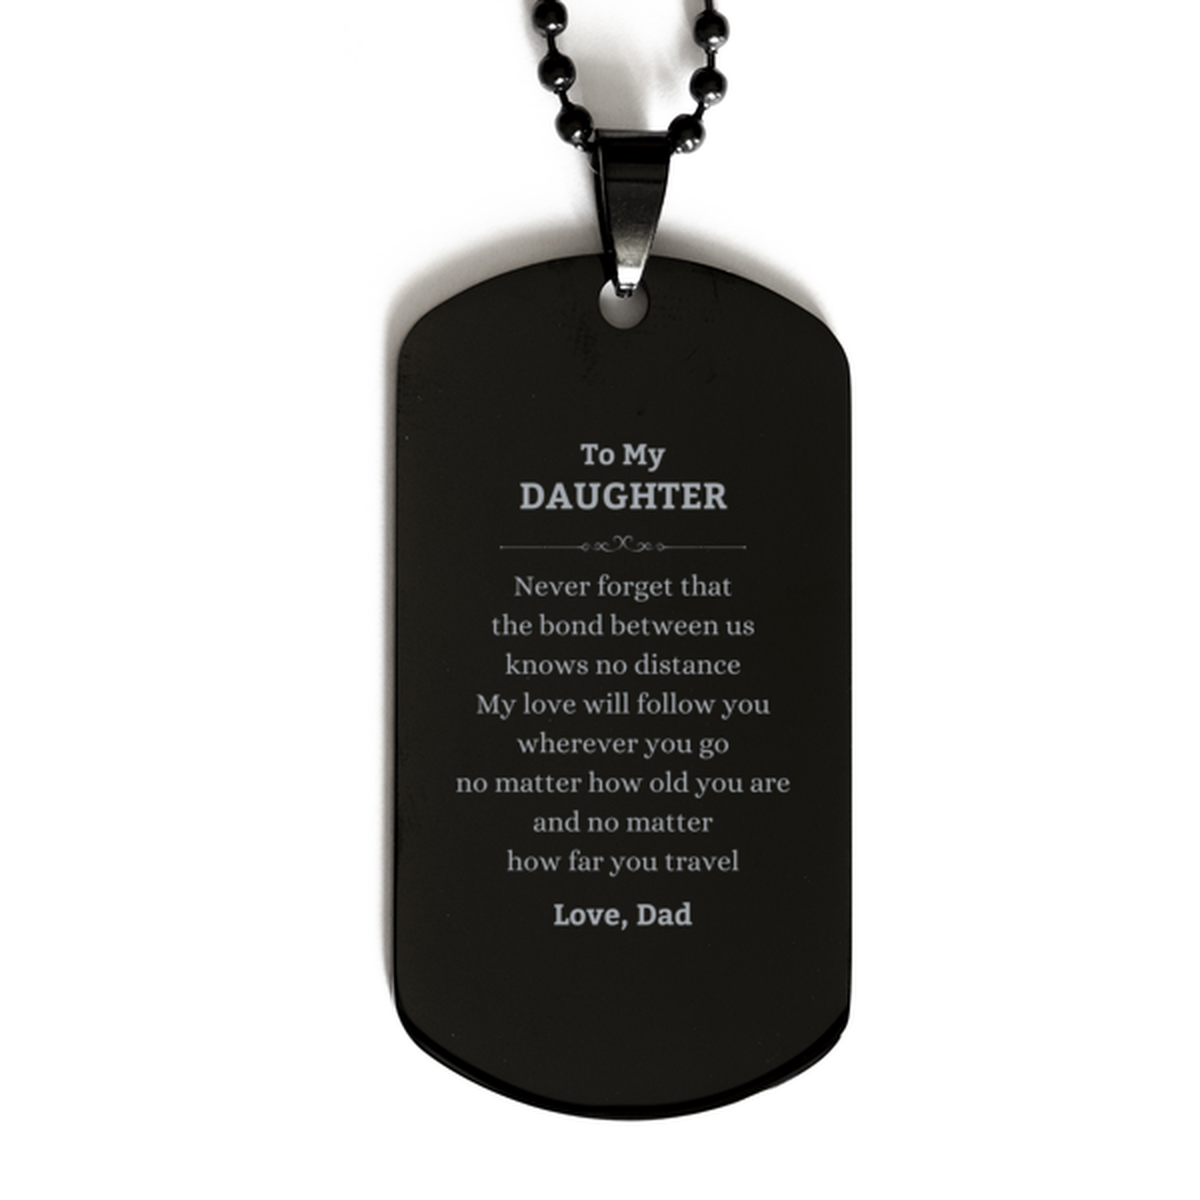 Daughter Birthday Gifts from Dad, Adjustable Black Dog Tag for Daughter Christmas Graduation Unique Gifts Daughter Never forget that the bond between us knows no distance. Love, Dad